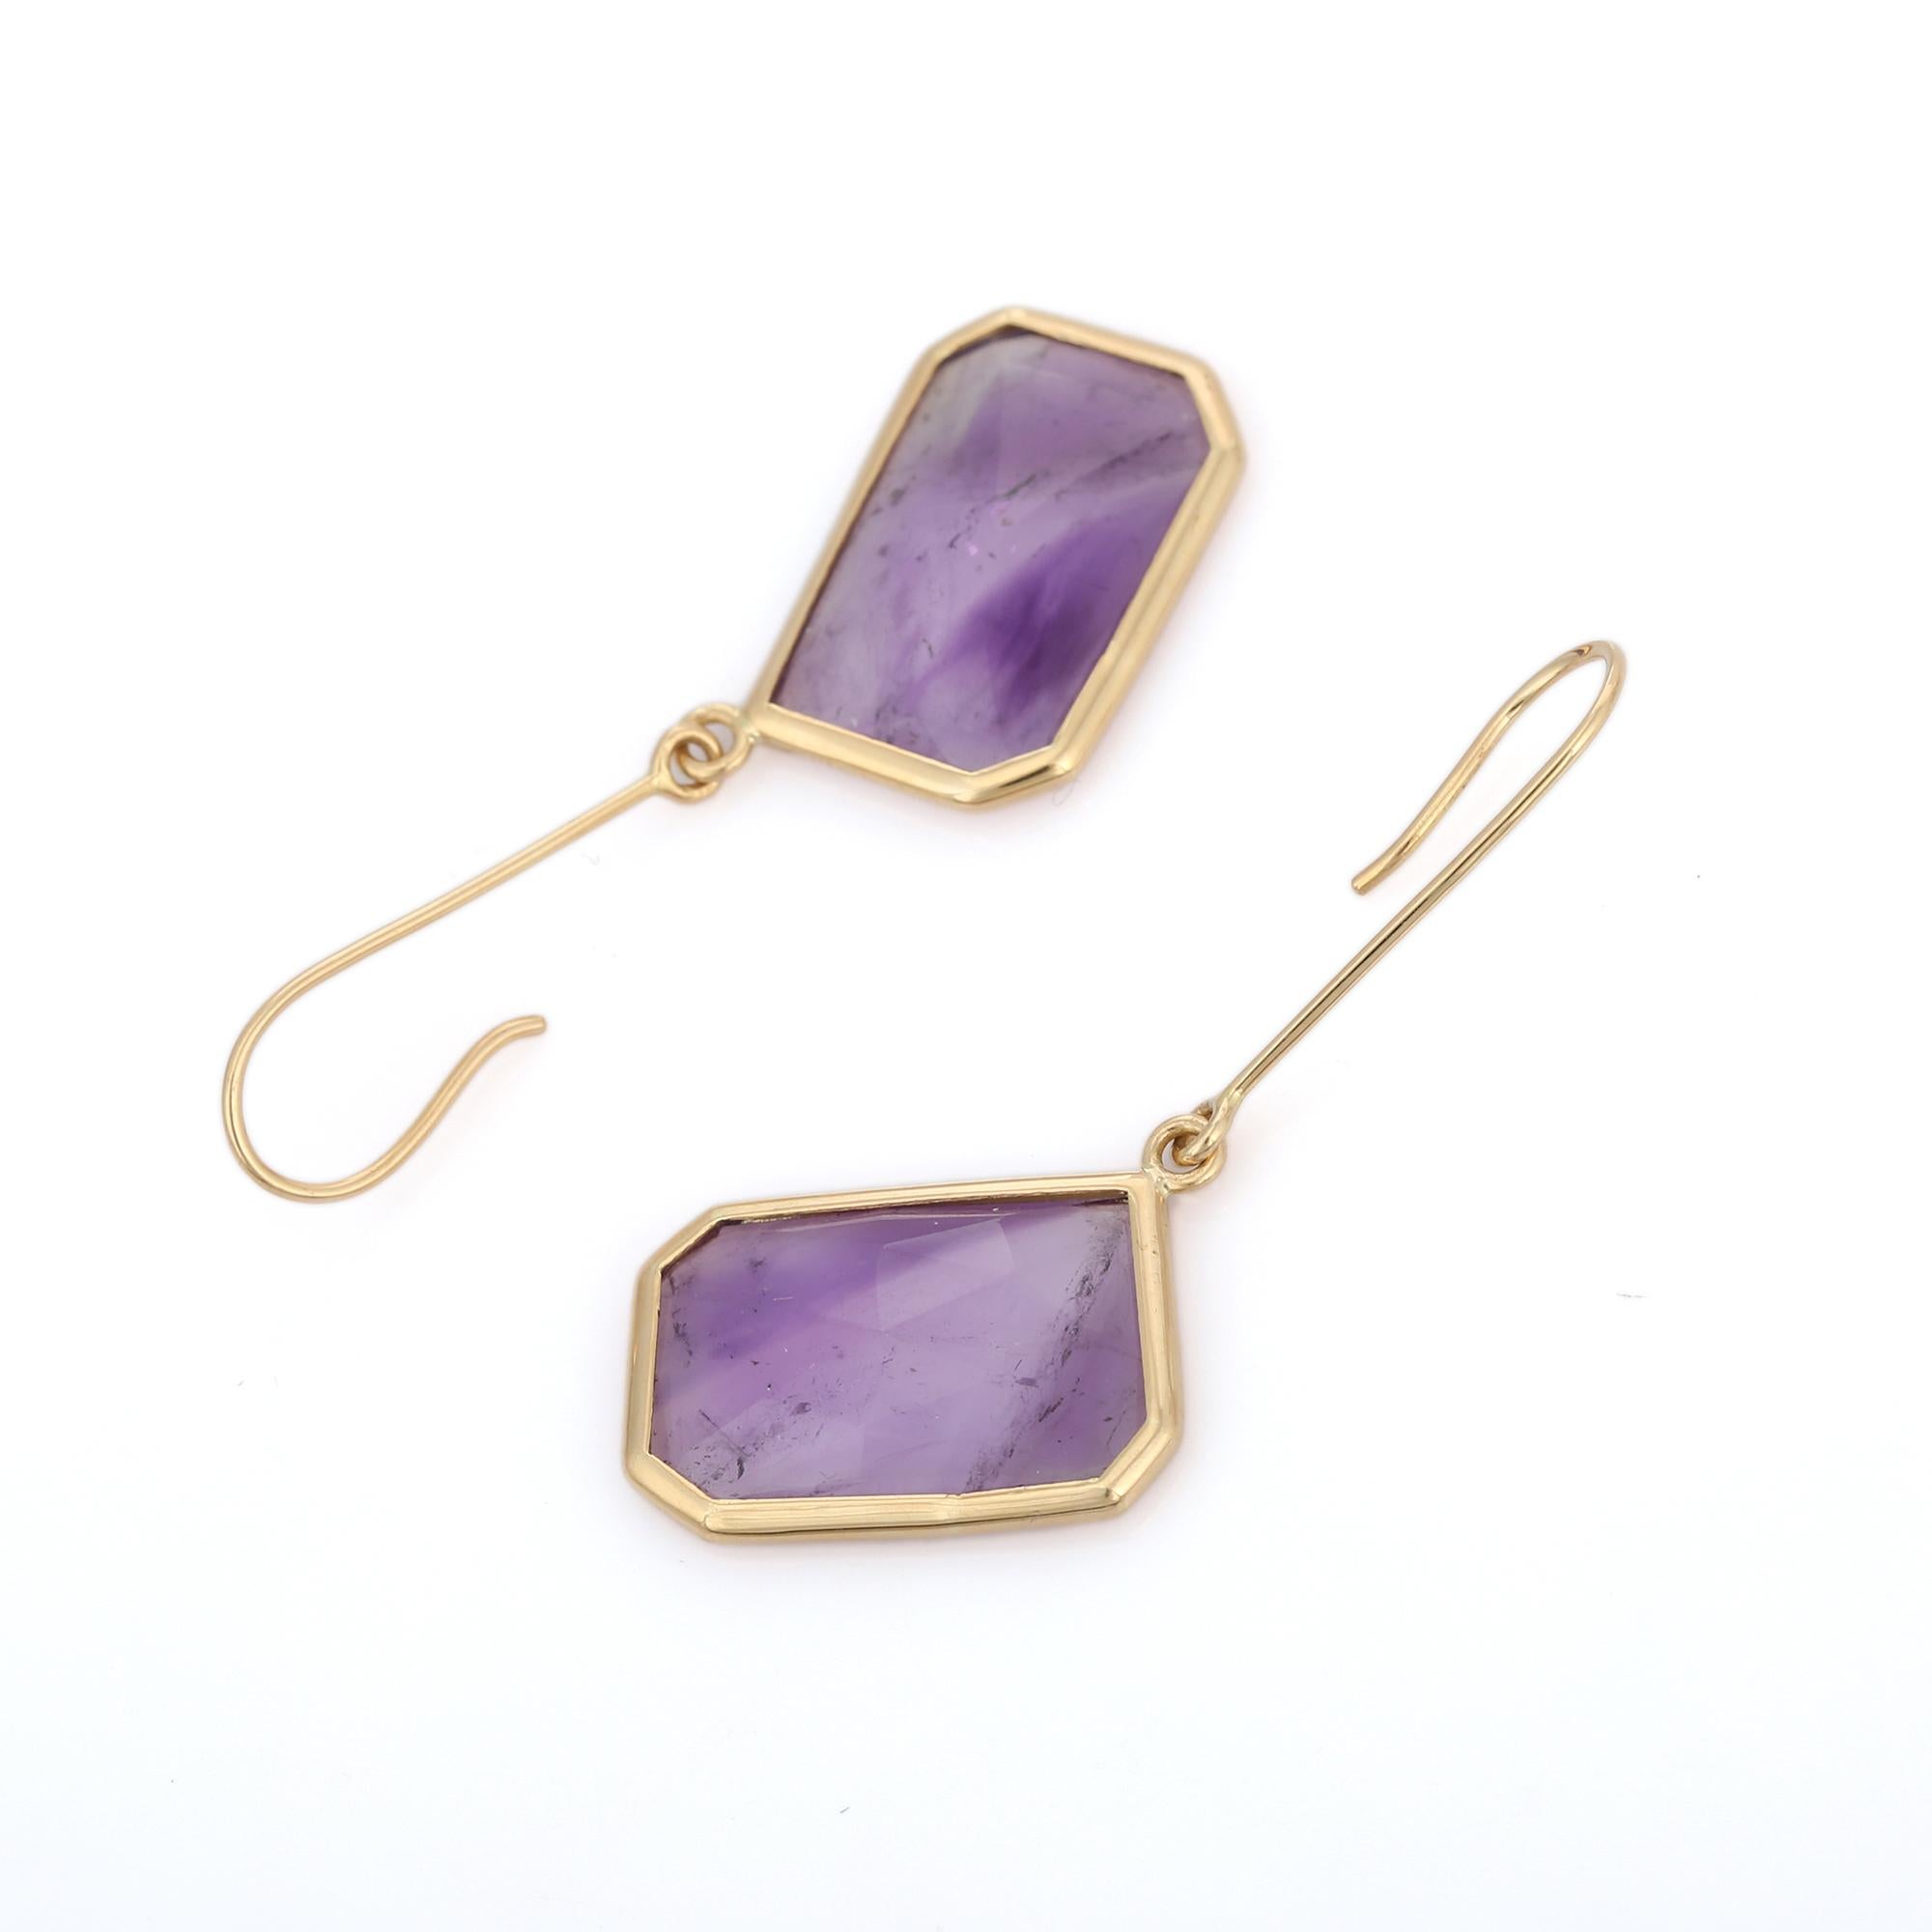 Amethyst Dangle earrings to make a statement with your look. These earrings create a sparkling, luxurious look featuring Octagon cut gemstone.
If you love to gravitate towards unique styles, this piece of jewelry is perfect for you.

PRODUCT DETAILS